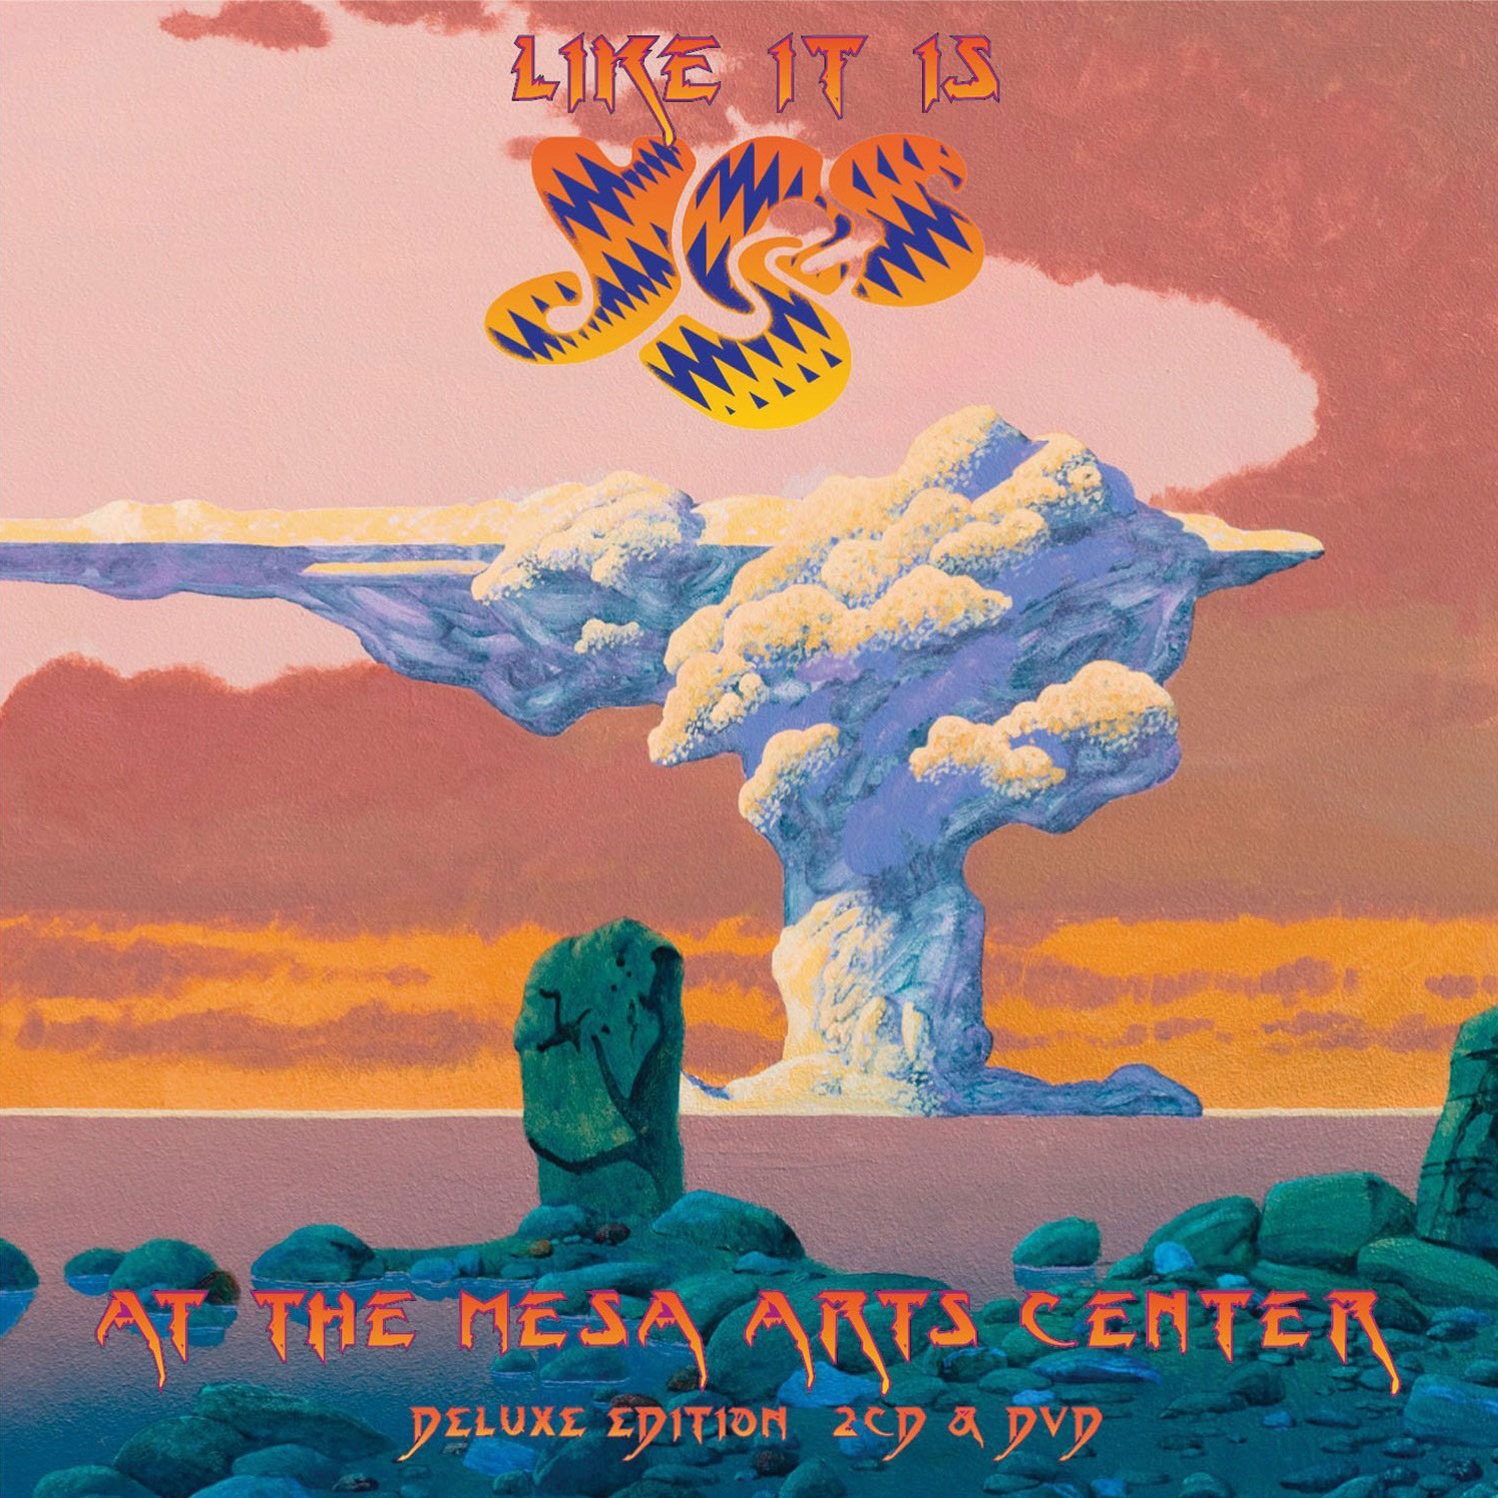 yes-like-it-is-at-the-mesa-arts-center-album-cover